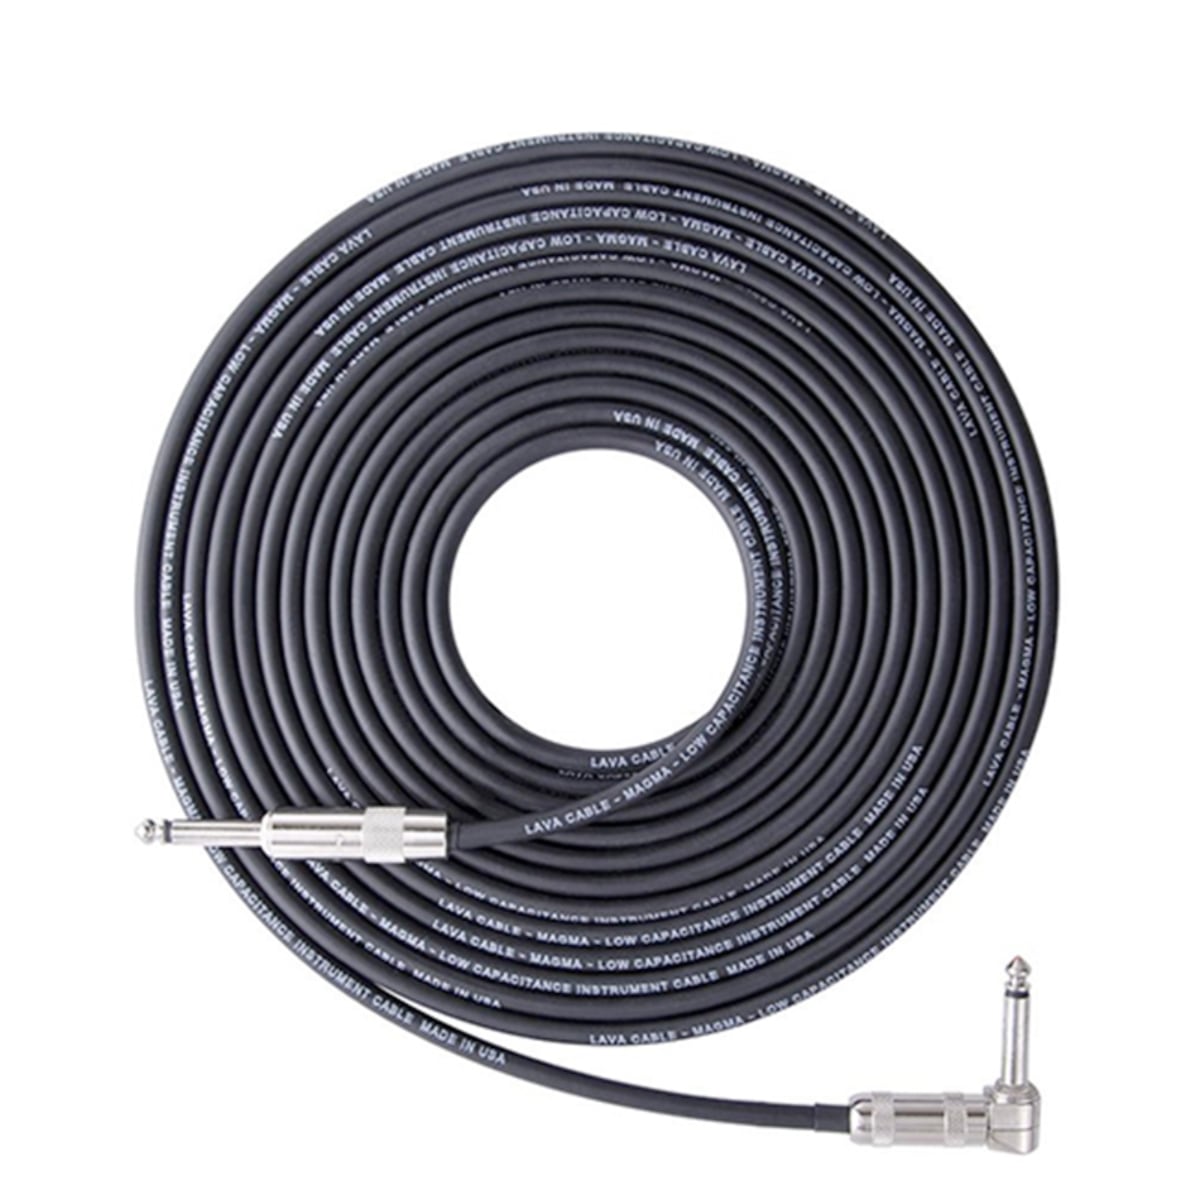 Lava Cable Magma Straight To Right 1/4" Instrument Cable